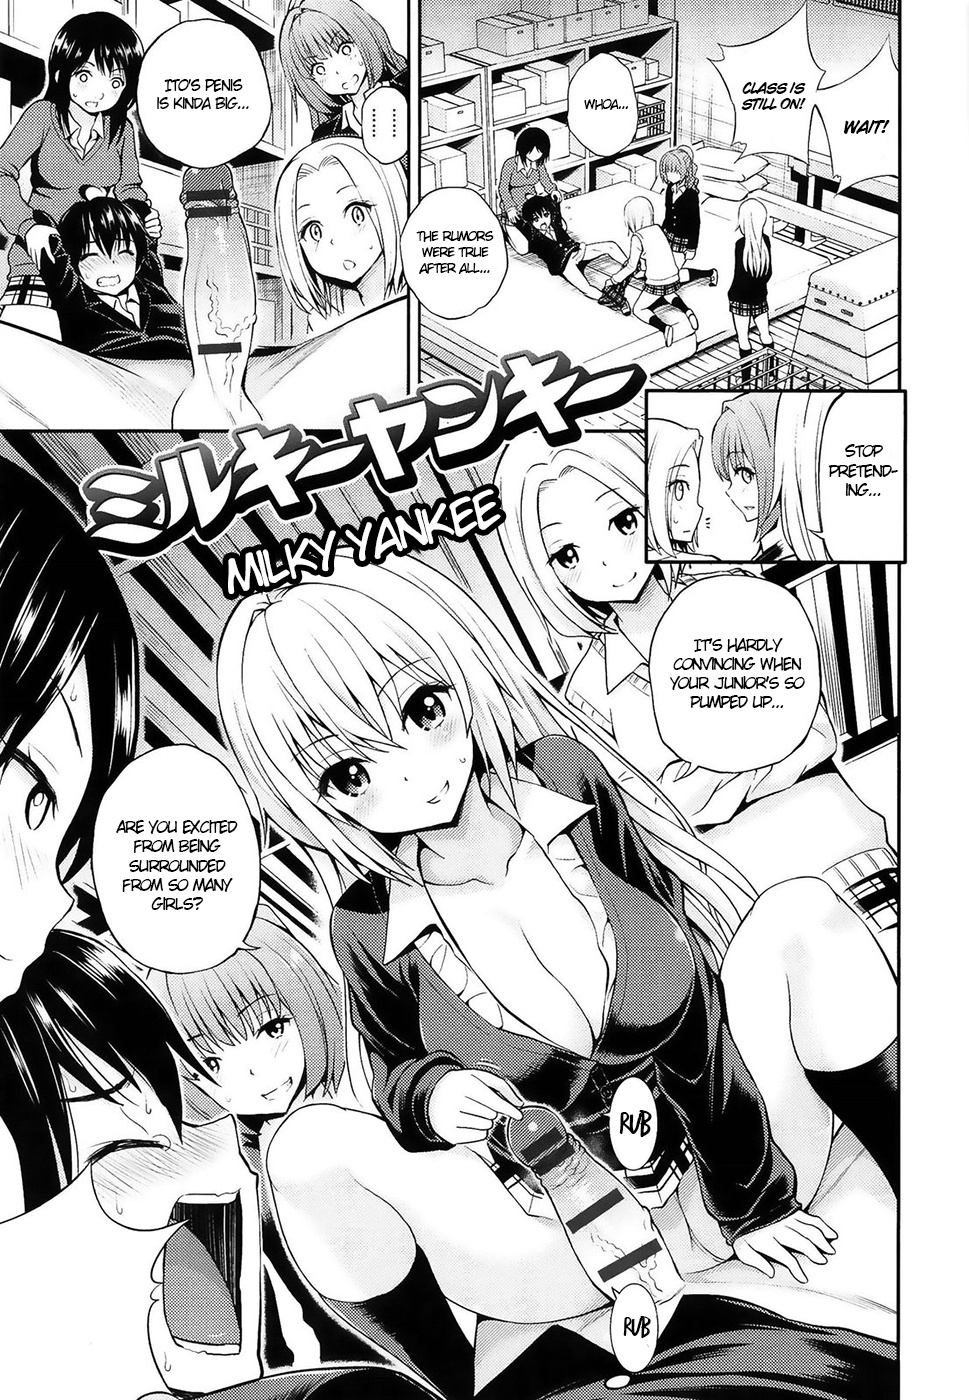 Hame Pero Vol.1 Chapter 9: Milky Yankee - Picture 1